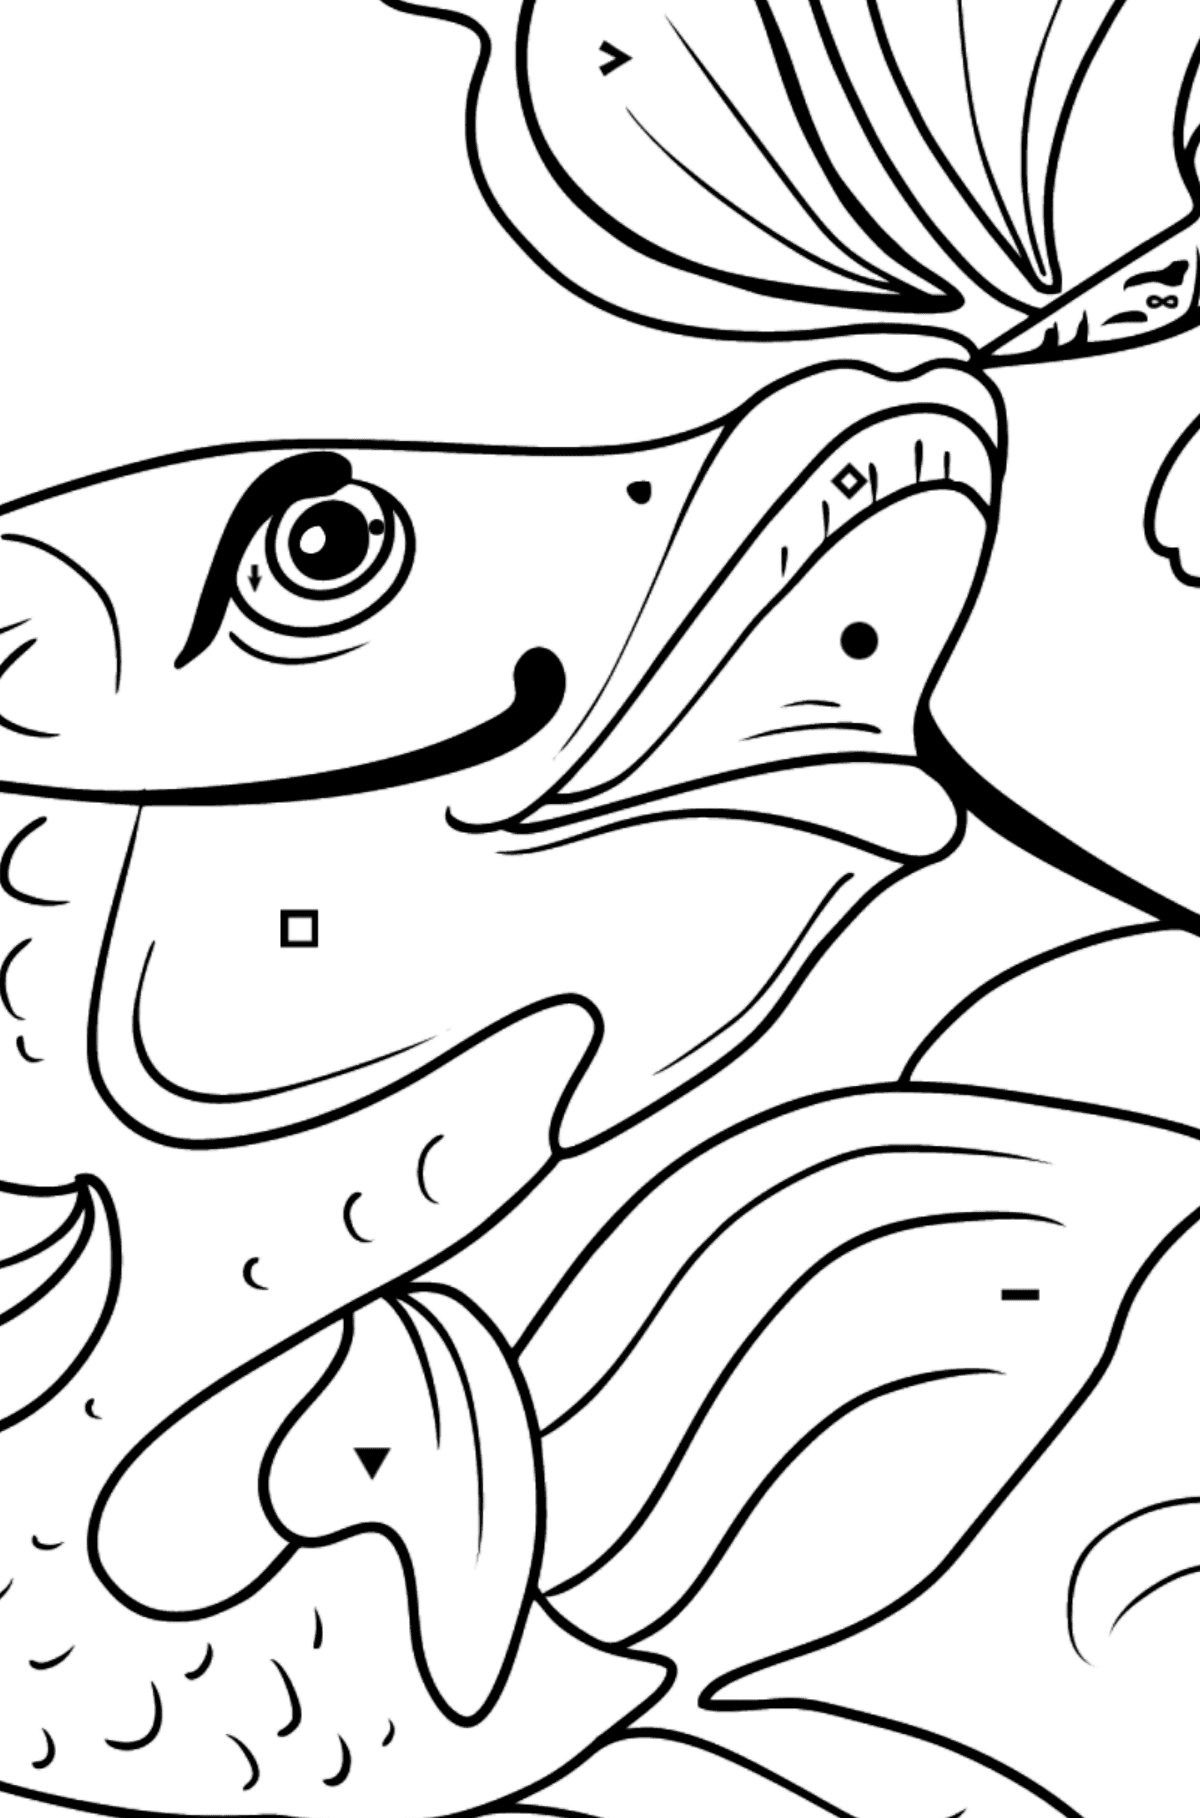 Fish and Butterfly coloring page - Coloring by Symbols for Kids